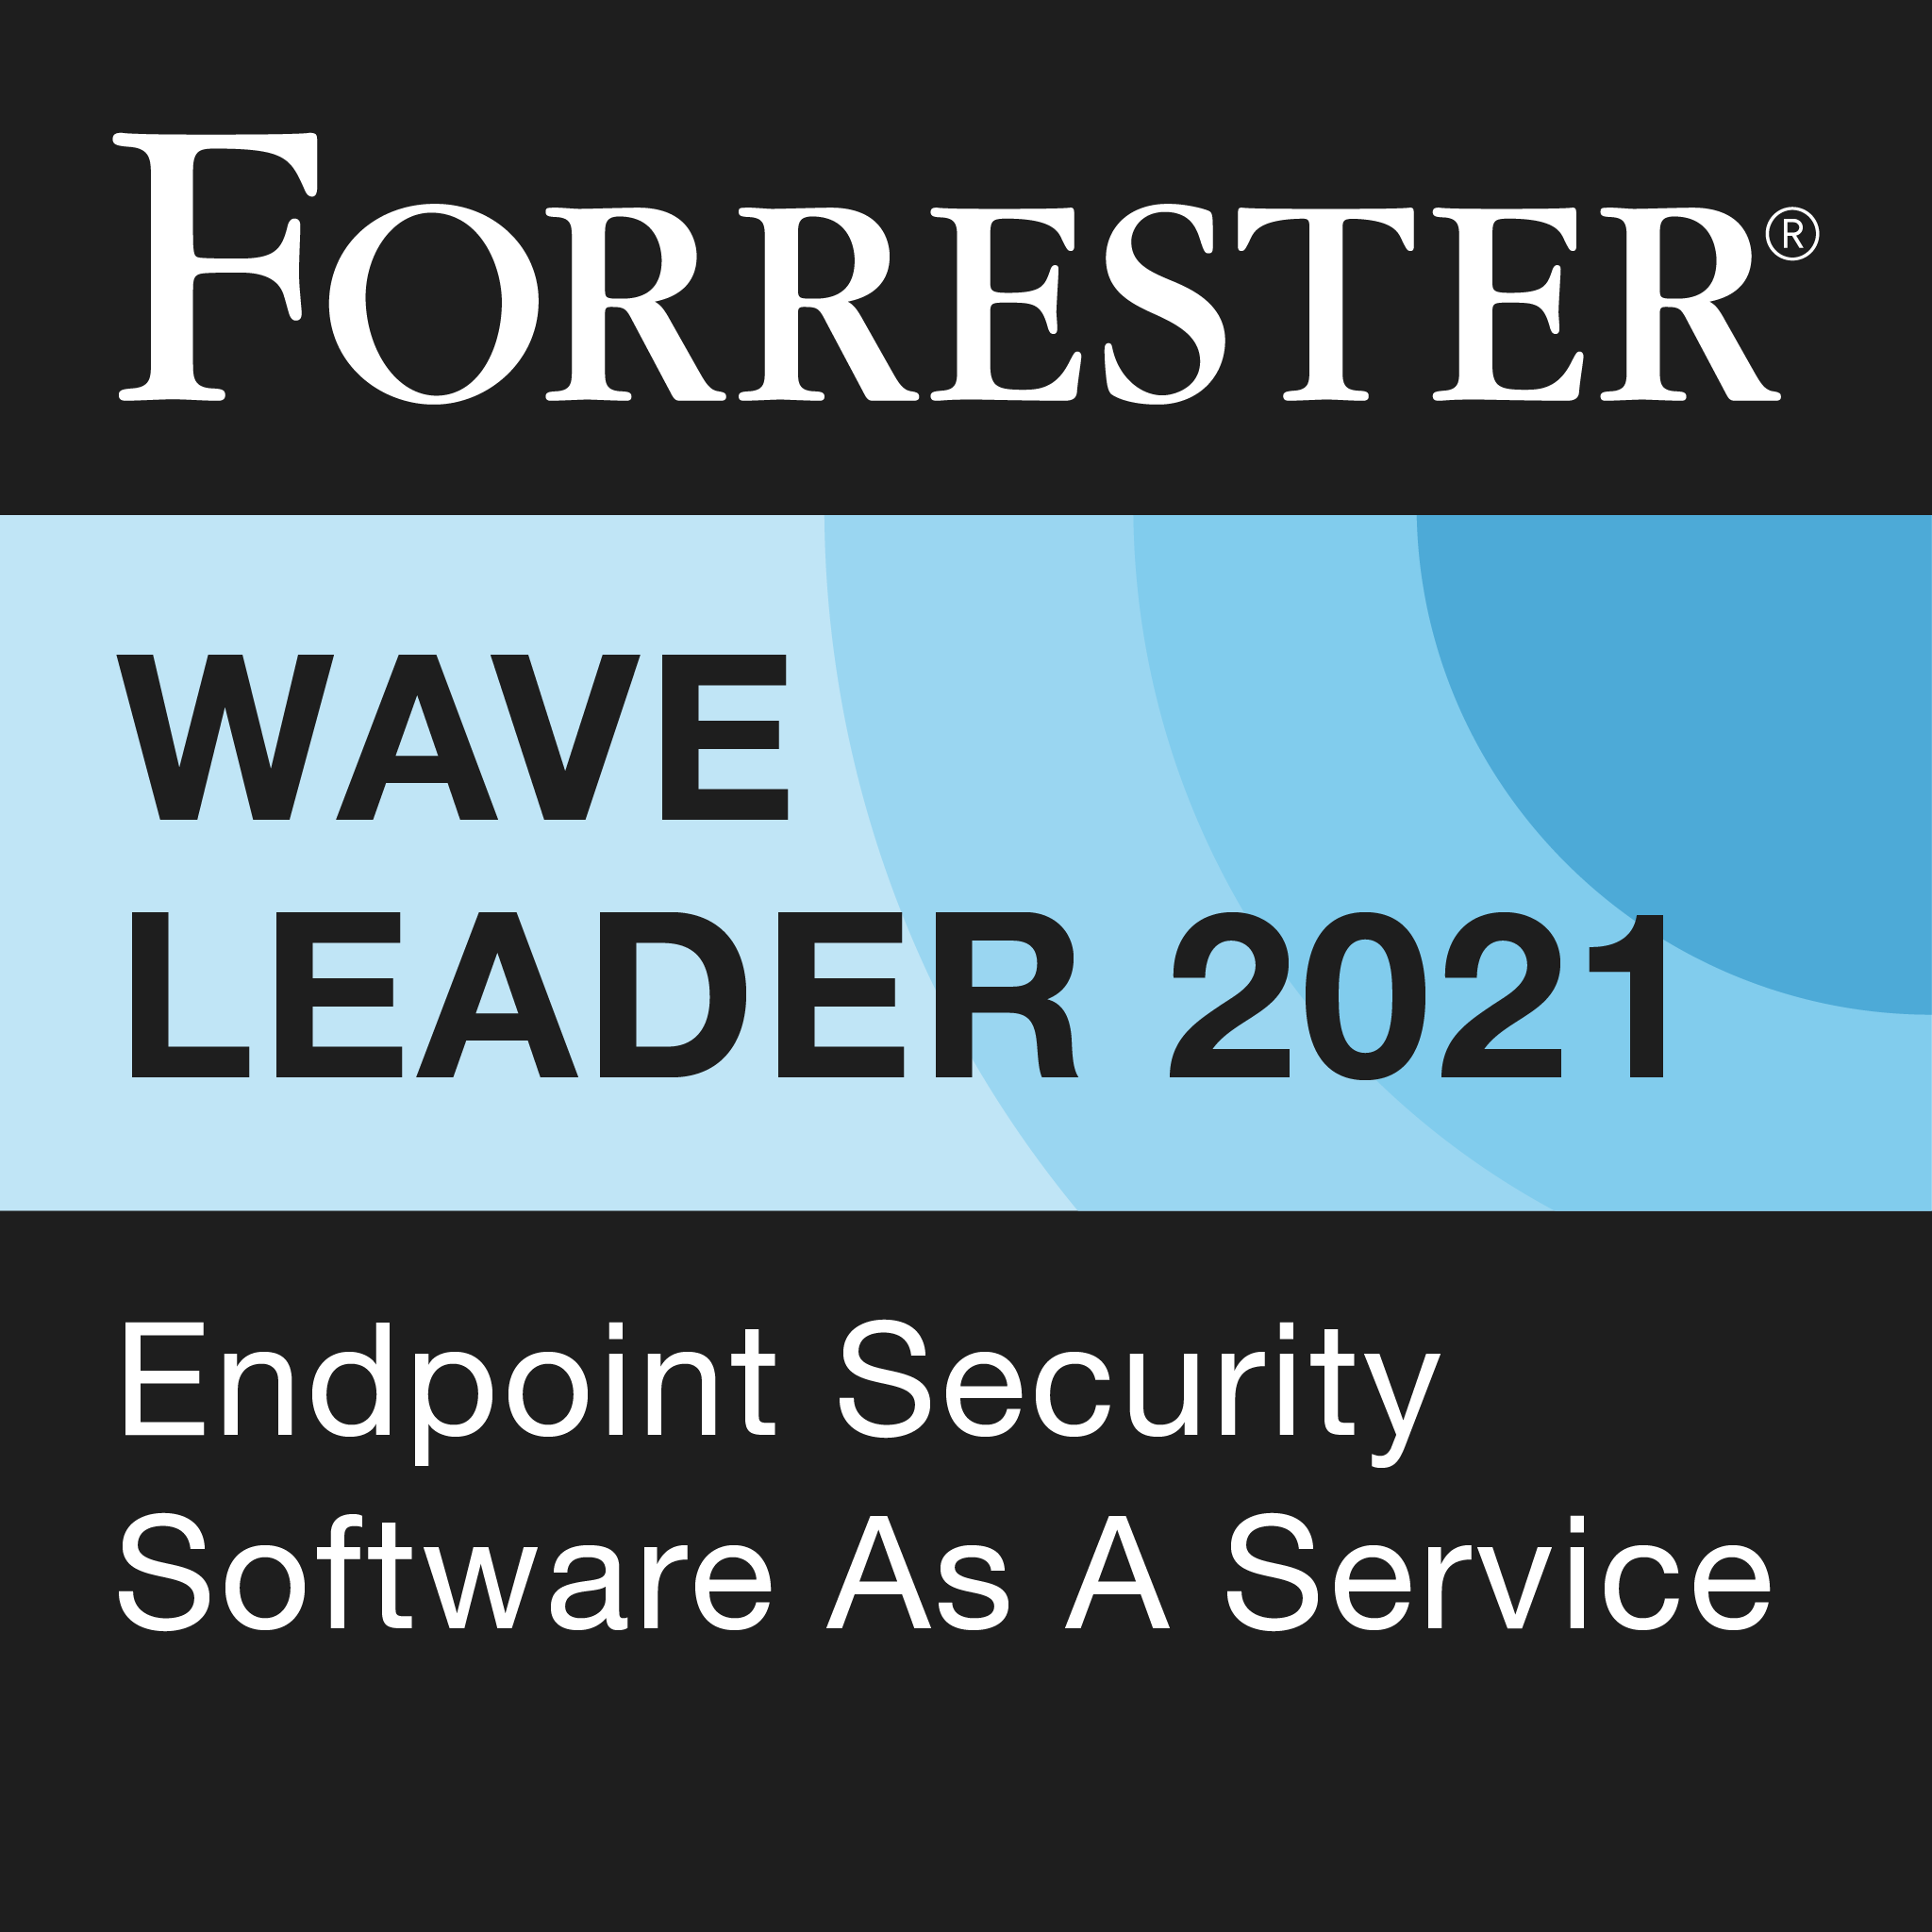 Badge: Forrester Wave Leader 2021: Endpoint Security Software as a Service